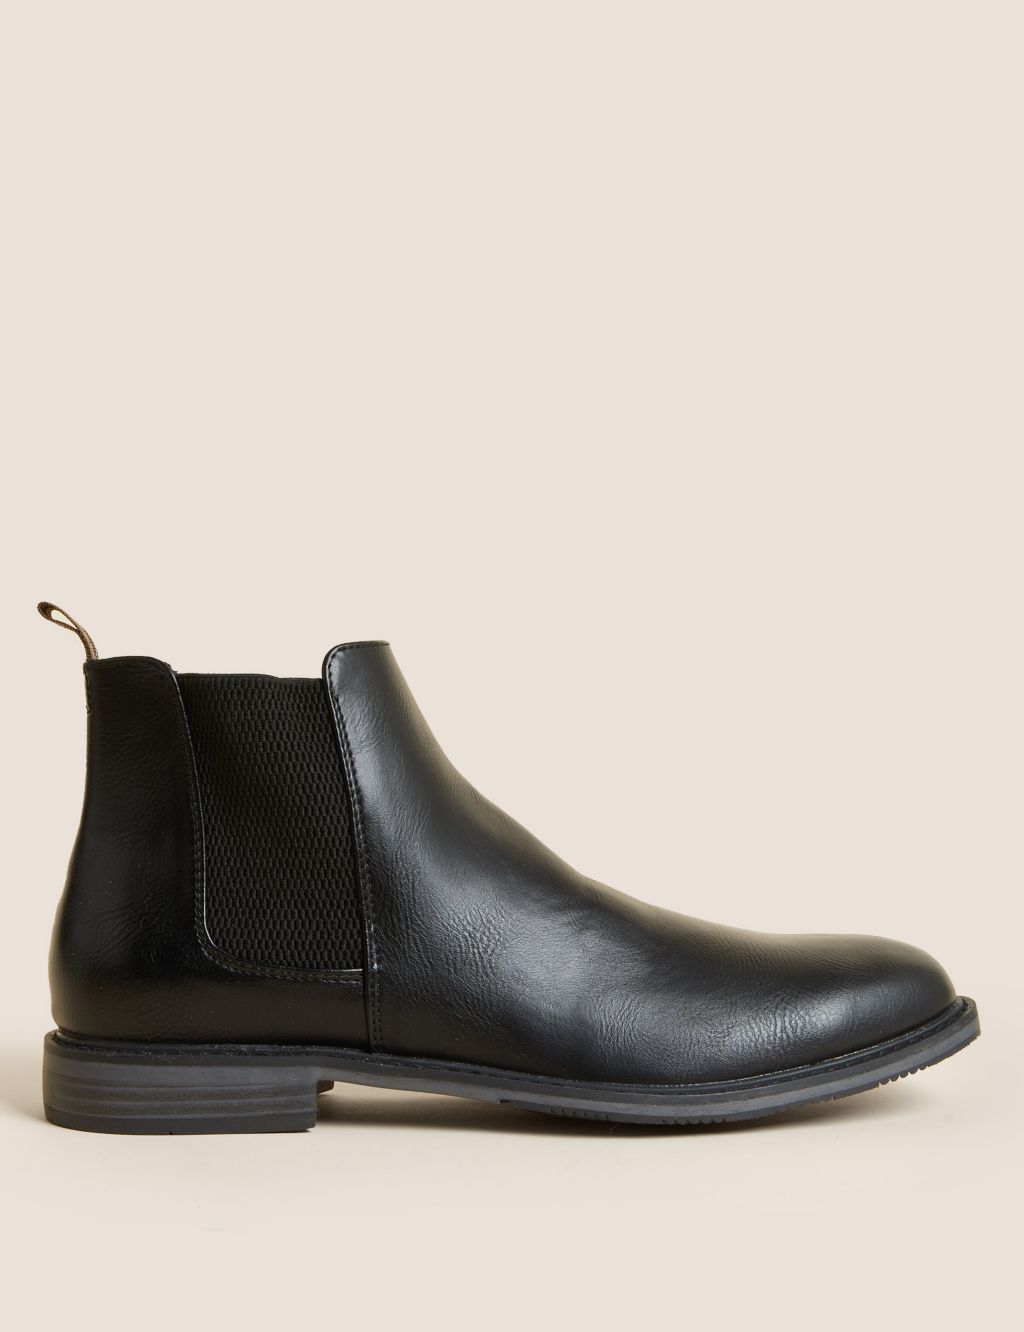 Pull-On Chelsea Boots image 1